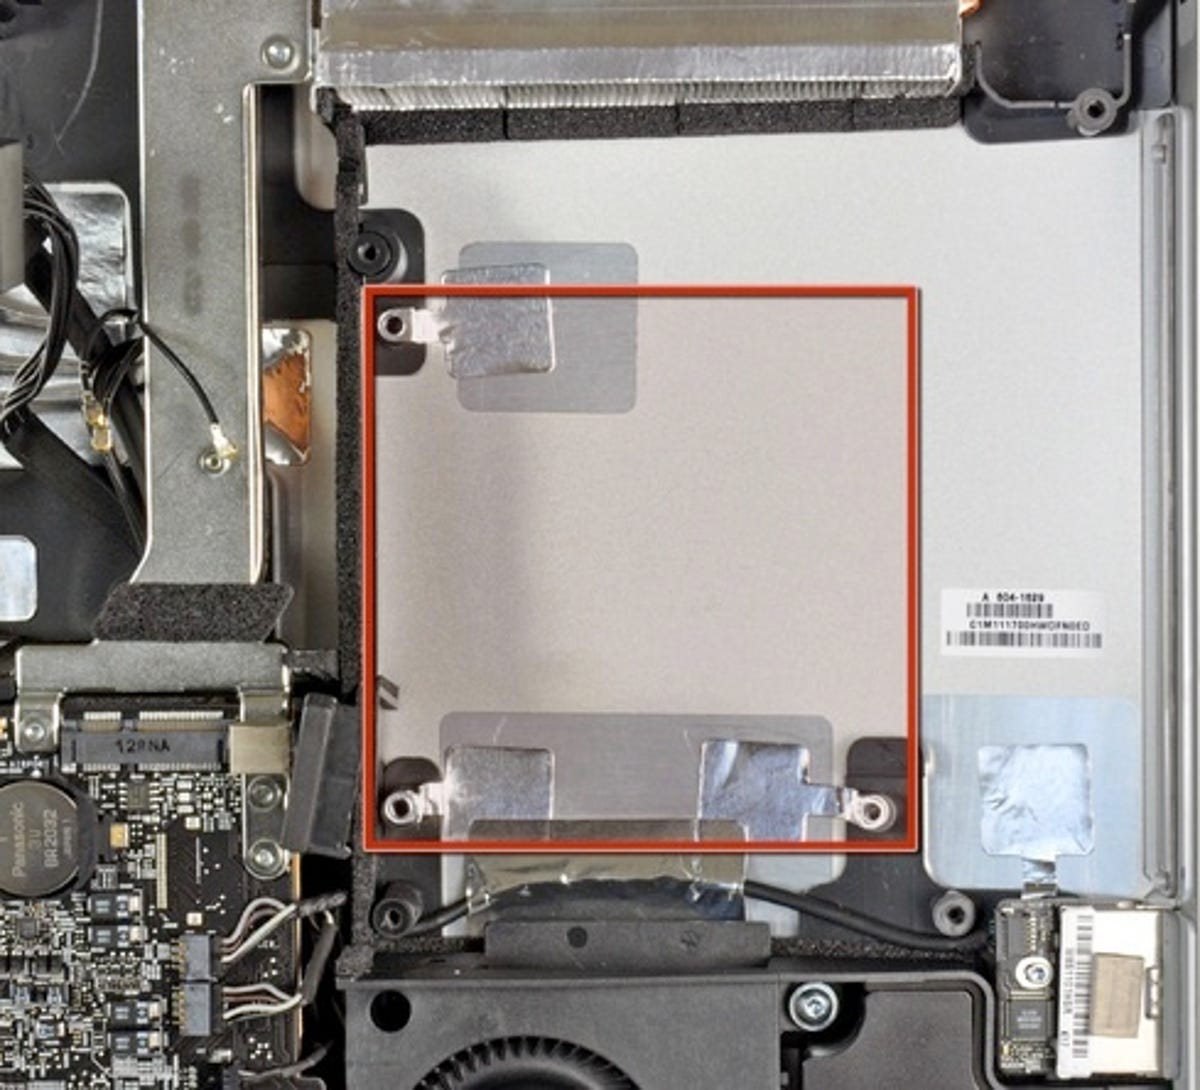 The area--which is under the Sony Optiarc optical drive--shaded in red is 'presumably' where the optional SSD is housed, according to iFixit.